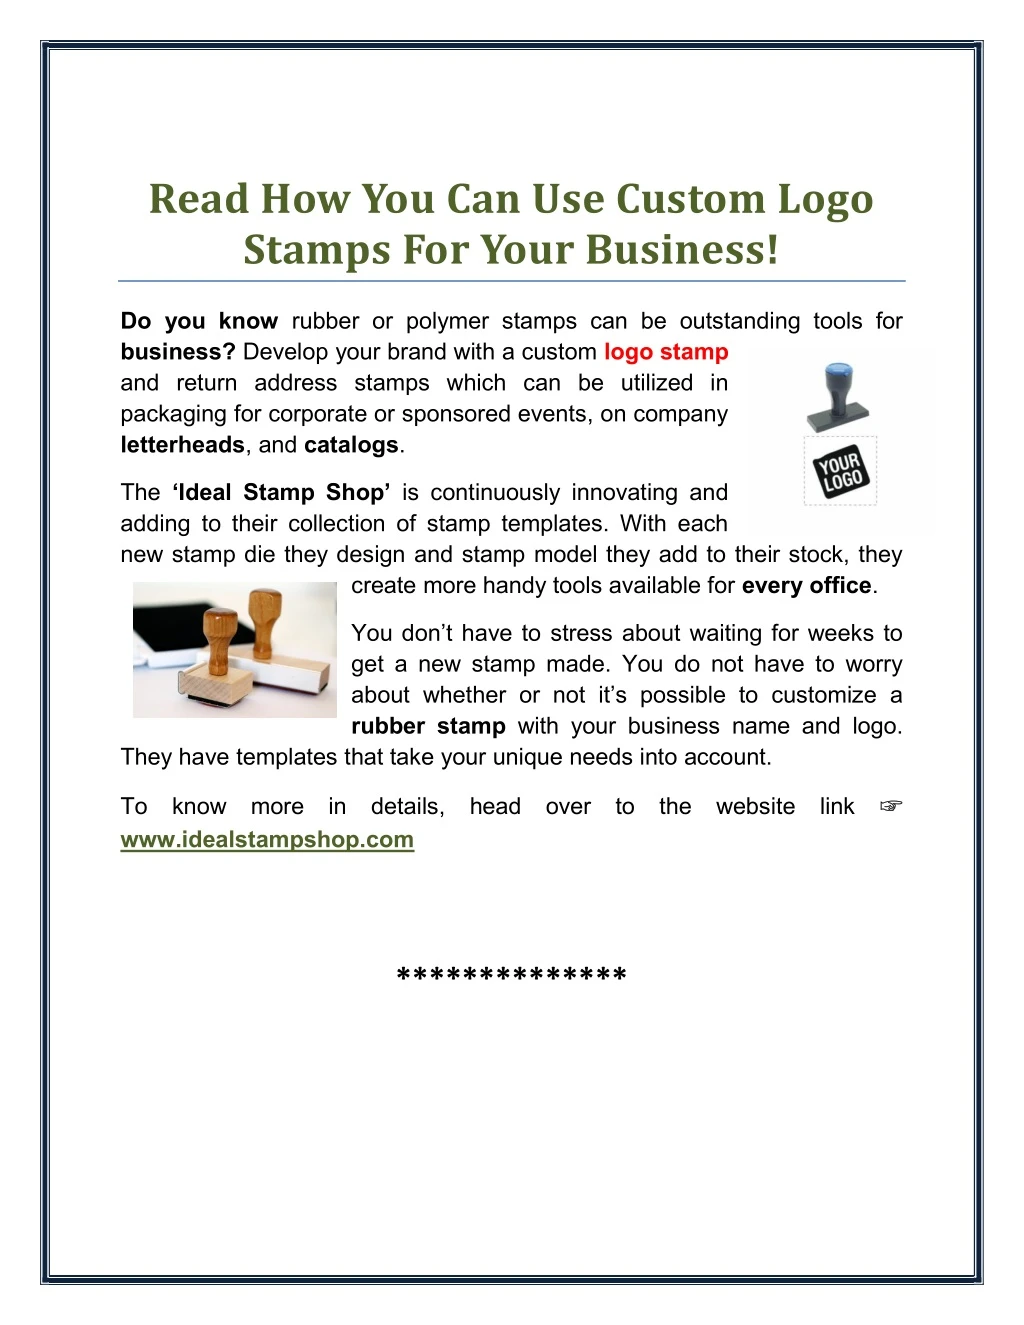 read how you can use custom logo stamps for your